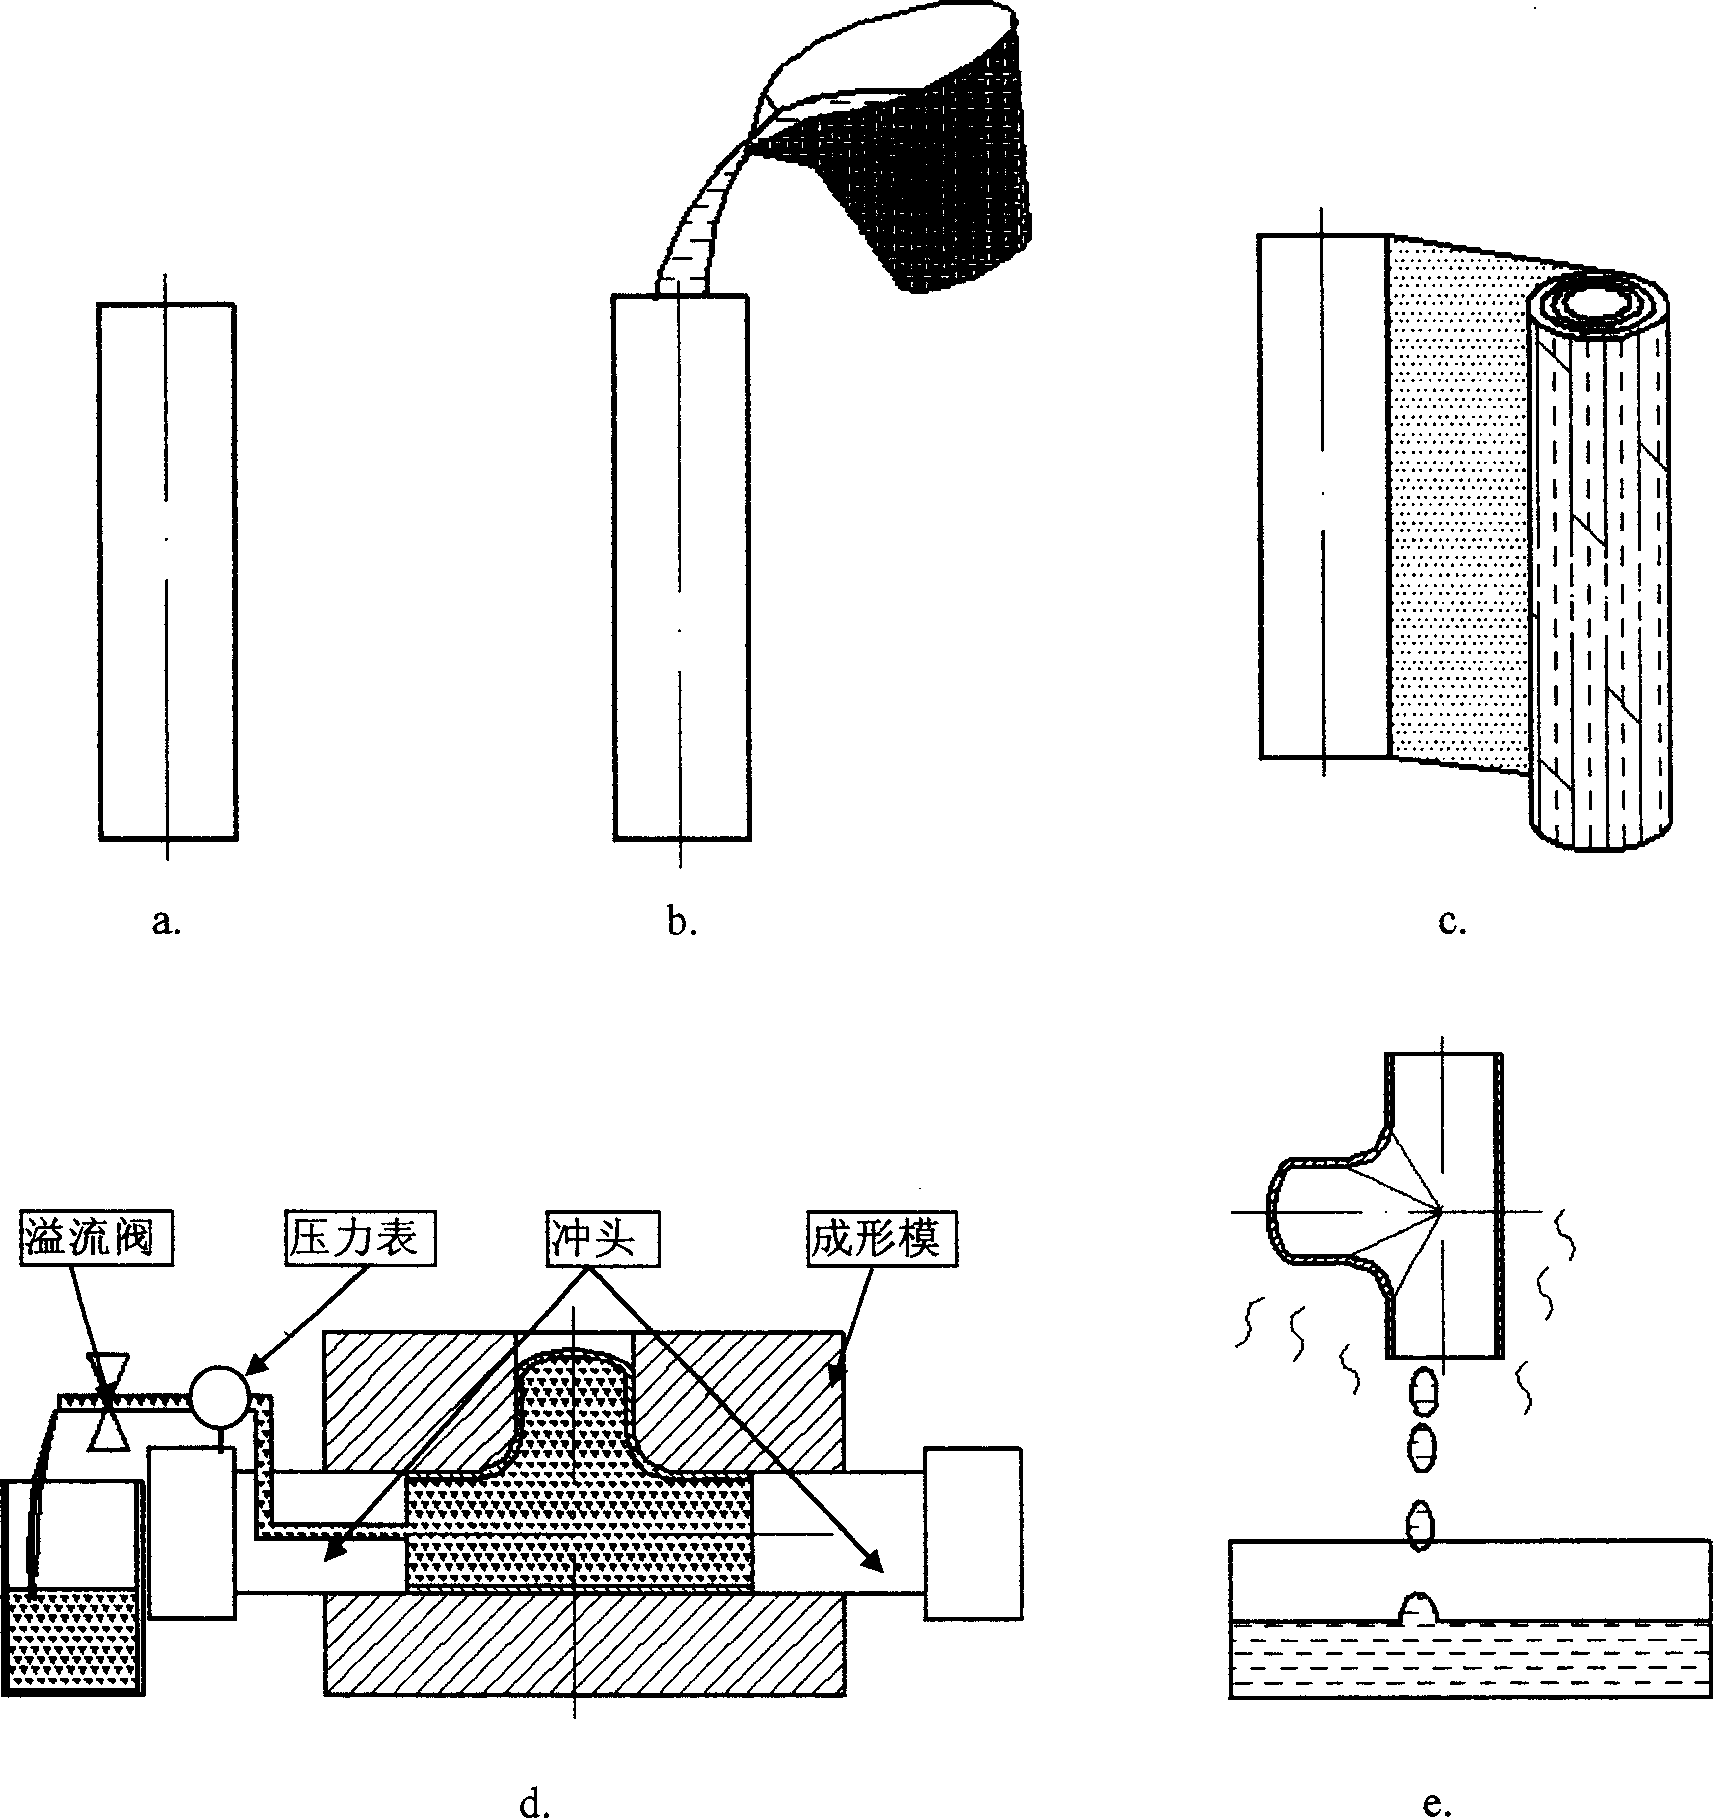 Method for manufacturing parts of multiple way union